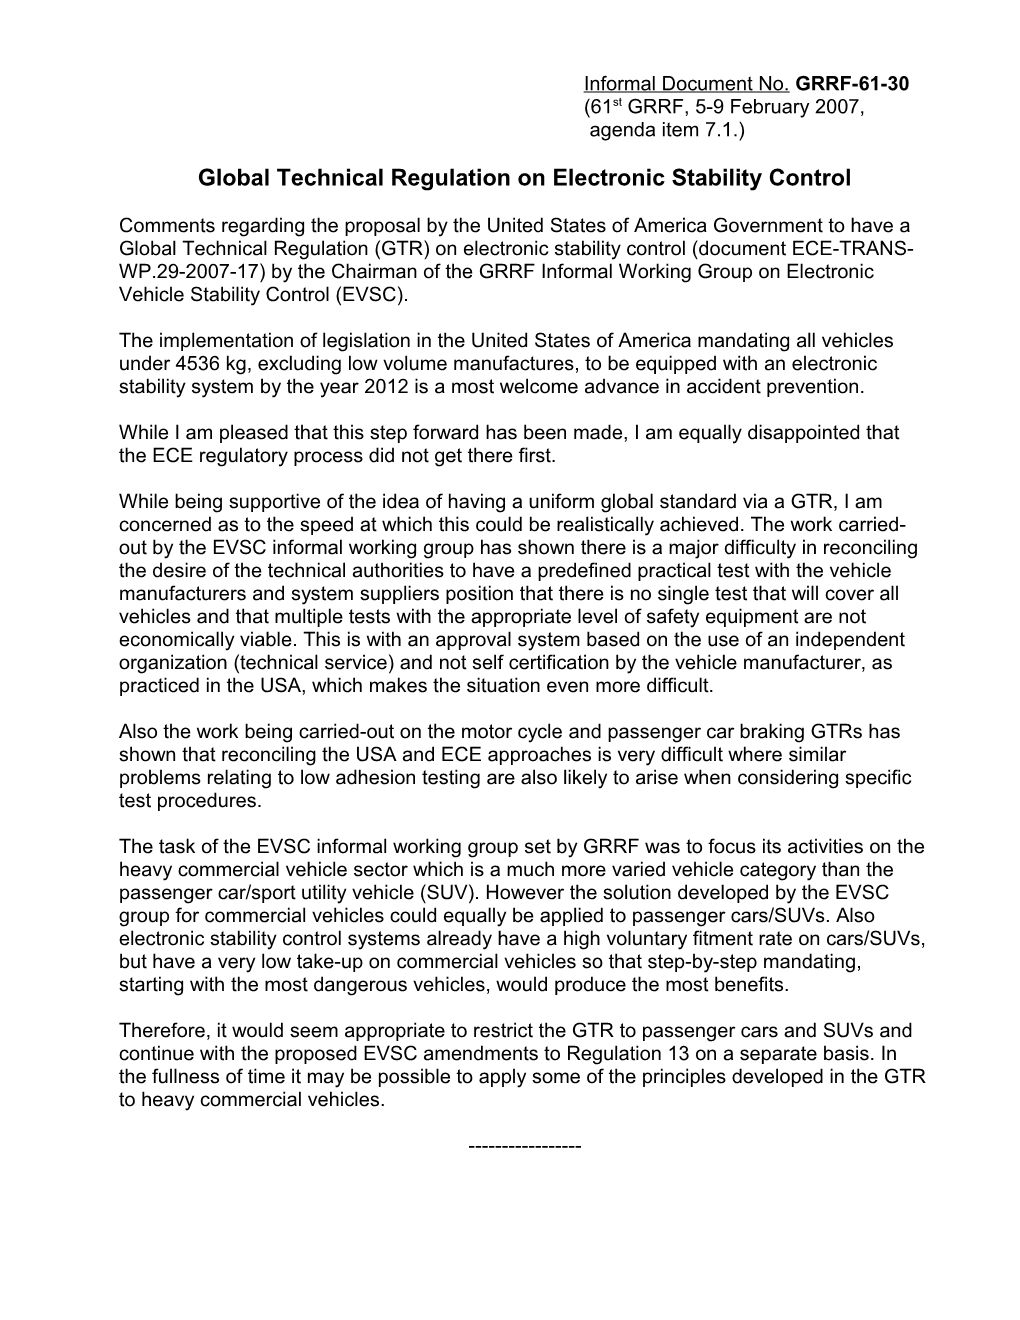 Global Technical Regulation on Electronic Stability Control